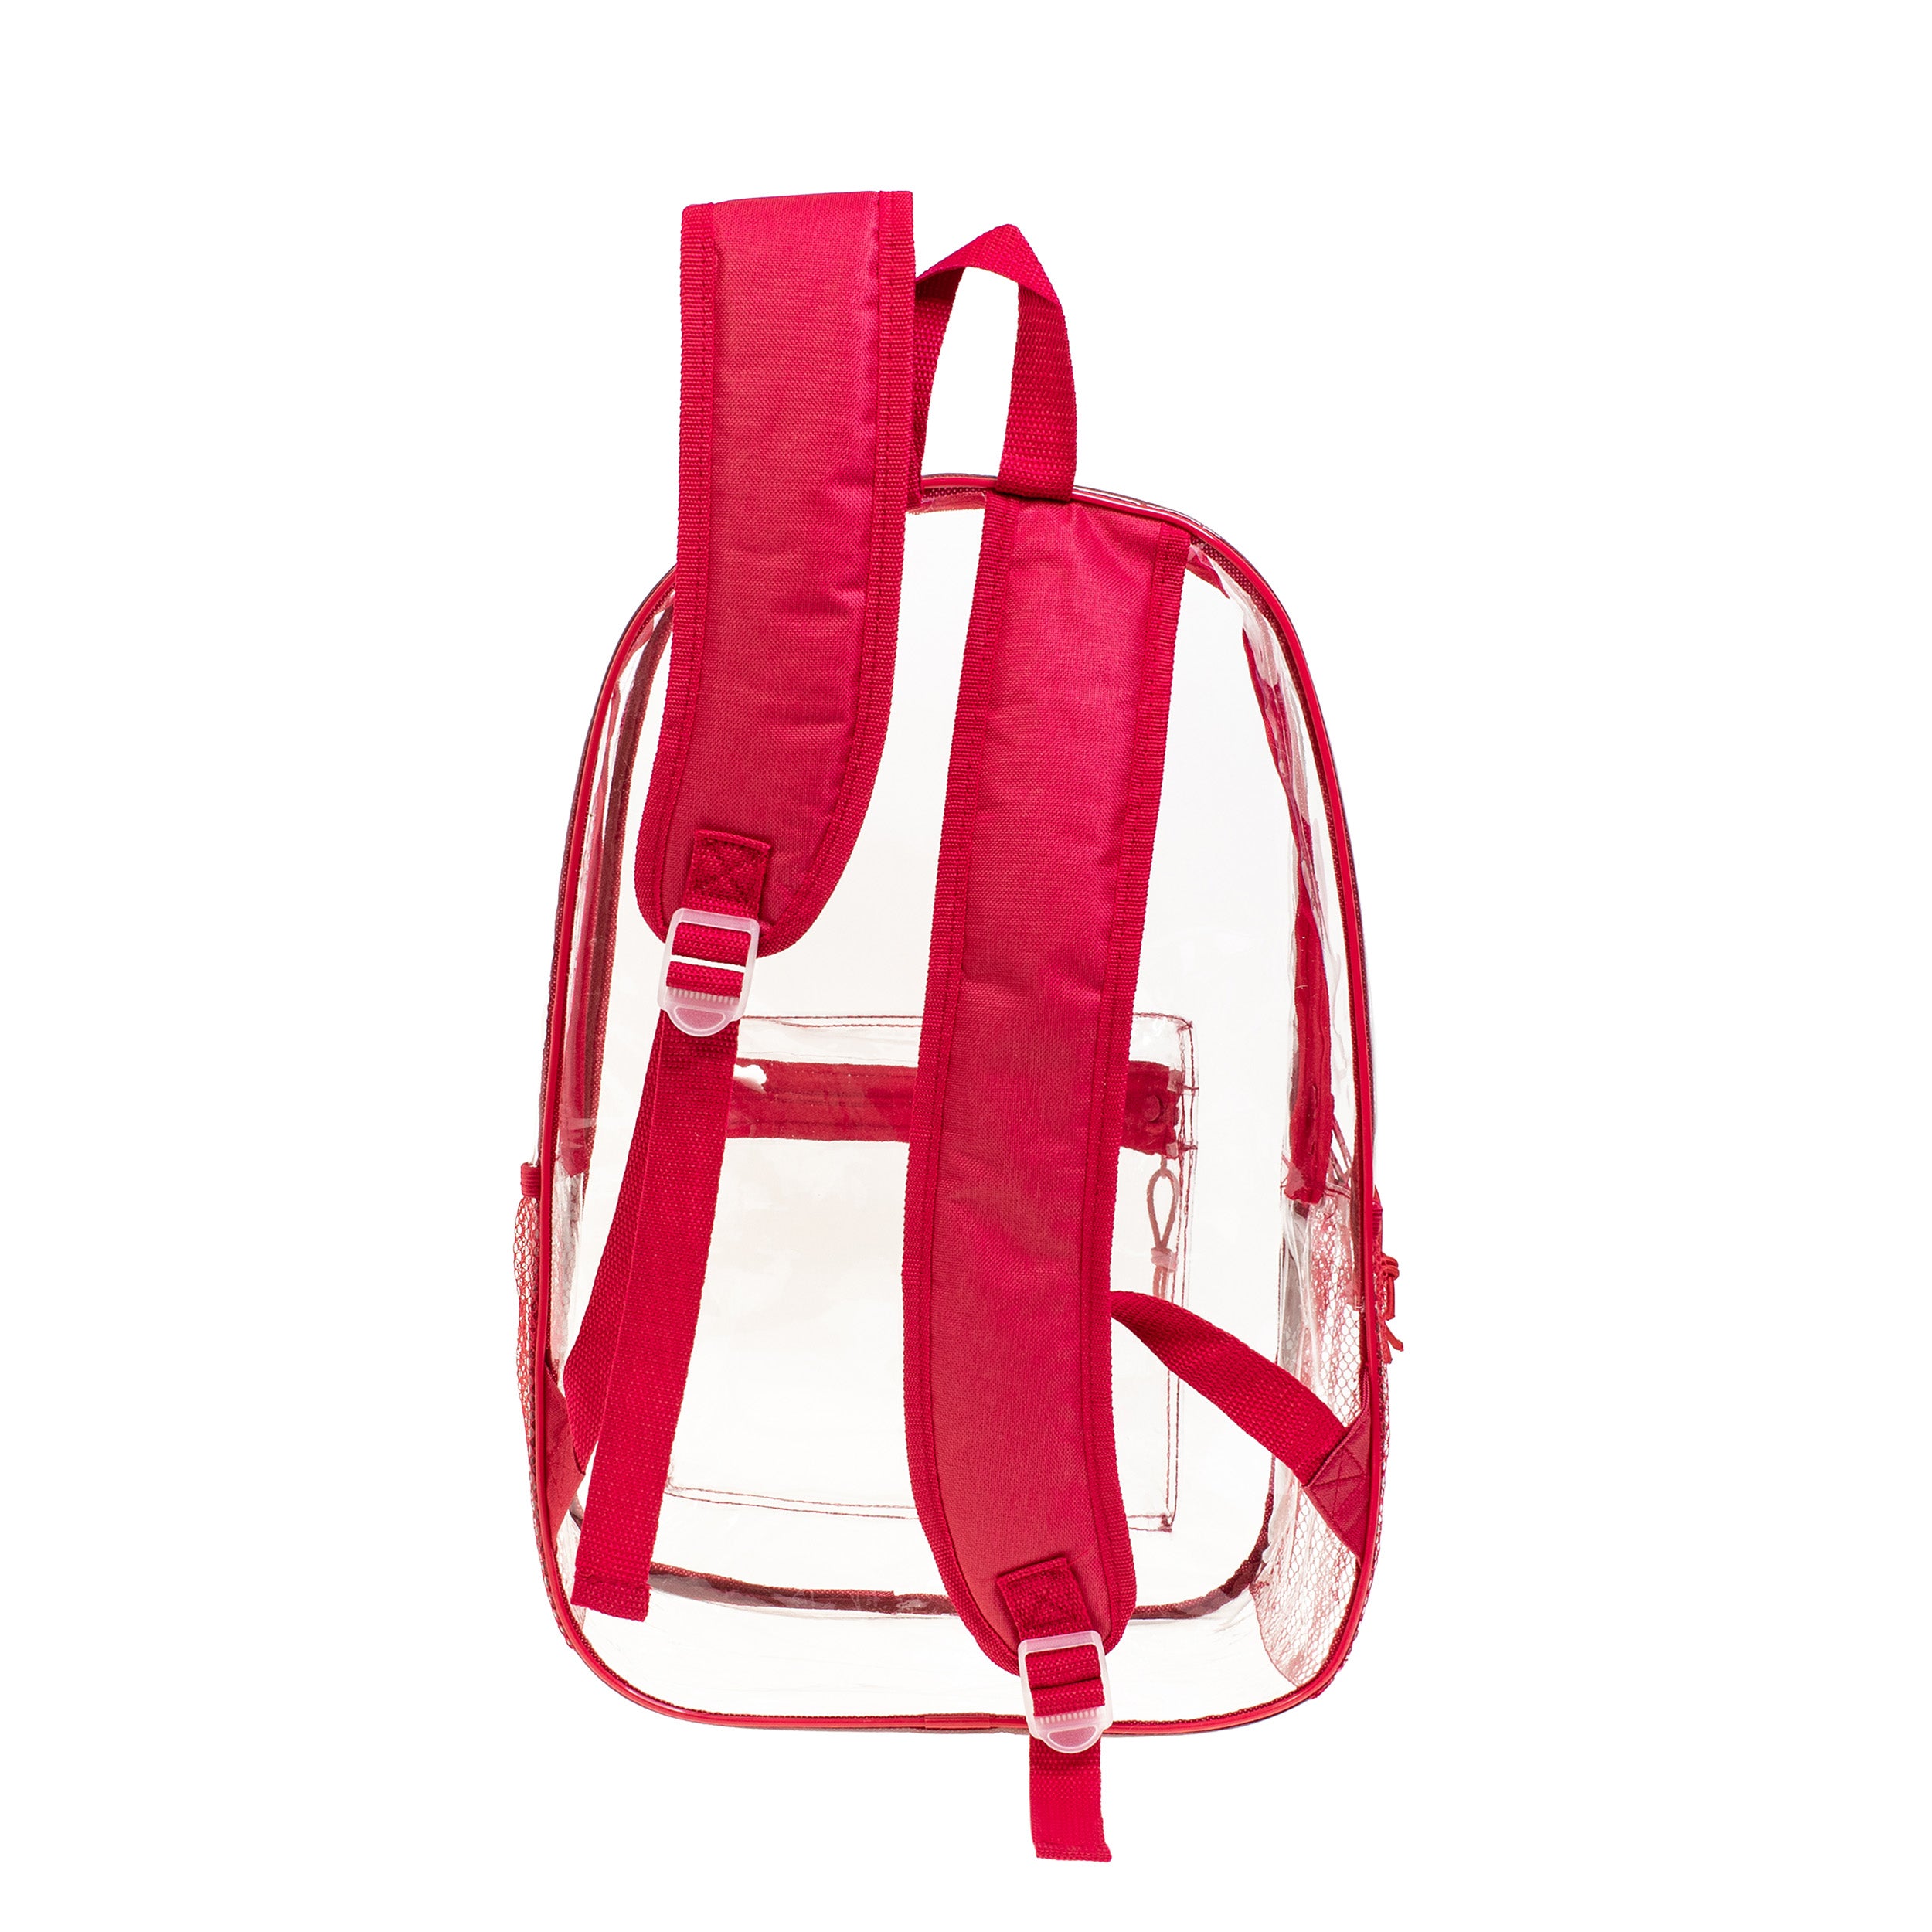 17" Transparent Wholesale Backpack in Assorted Colors - Bulk Case of 24